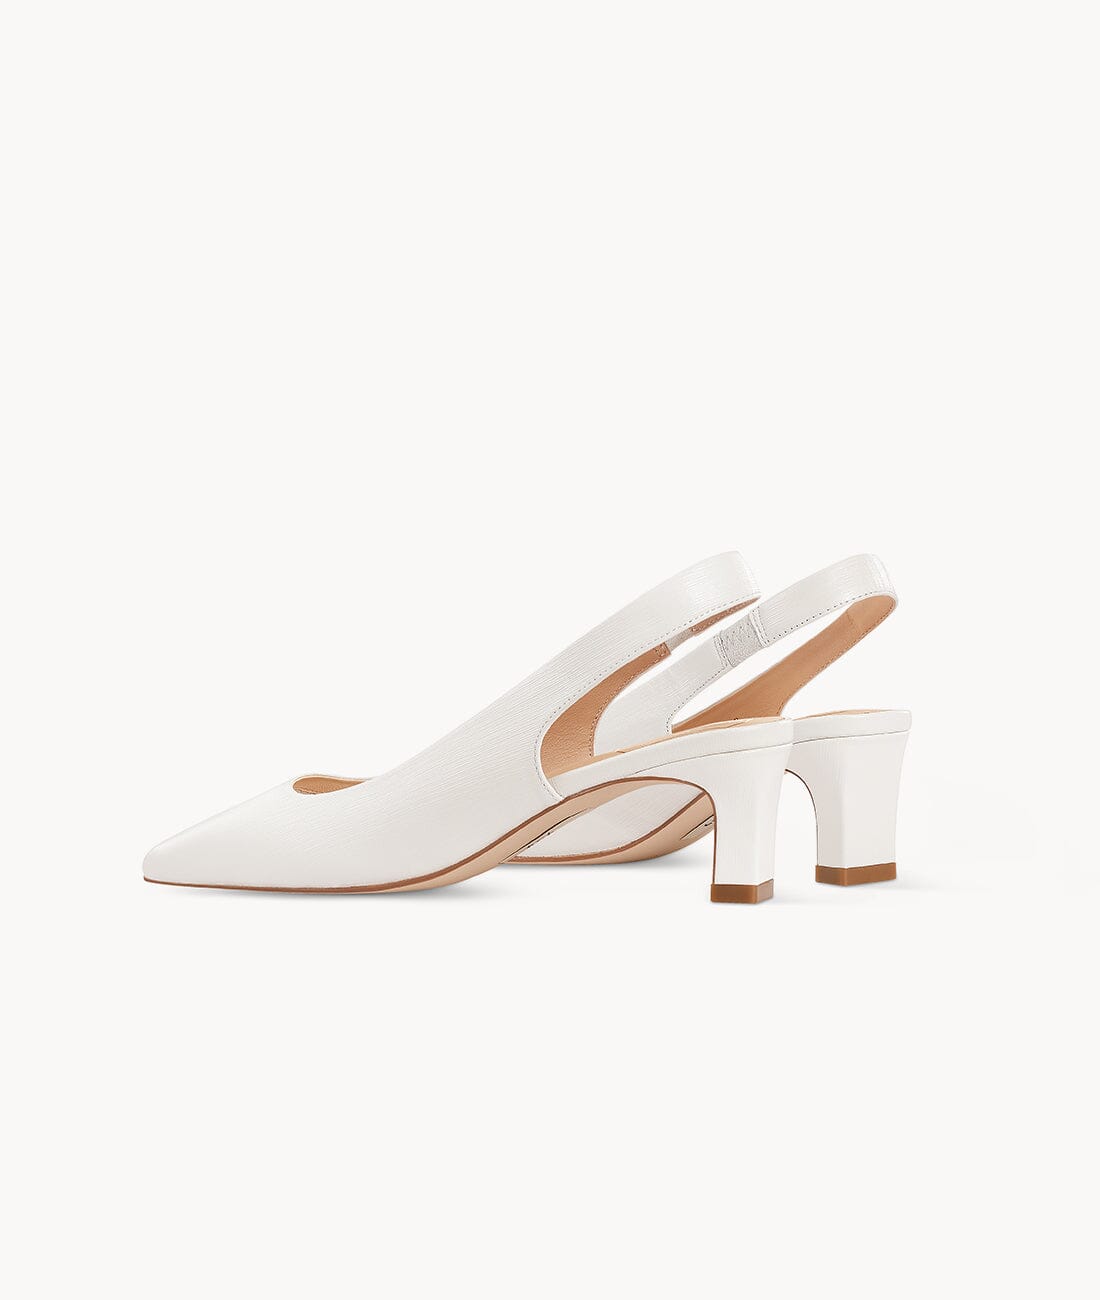 7or9 AIR-TOUCH FOAM 5CM white SLINGBACKS - Blanched Almond Pumps 7or9 